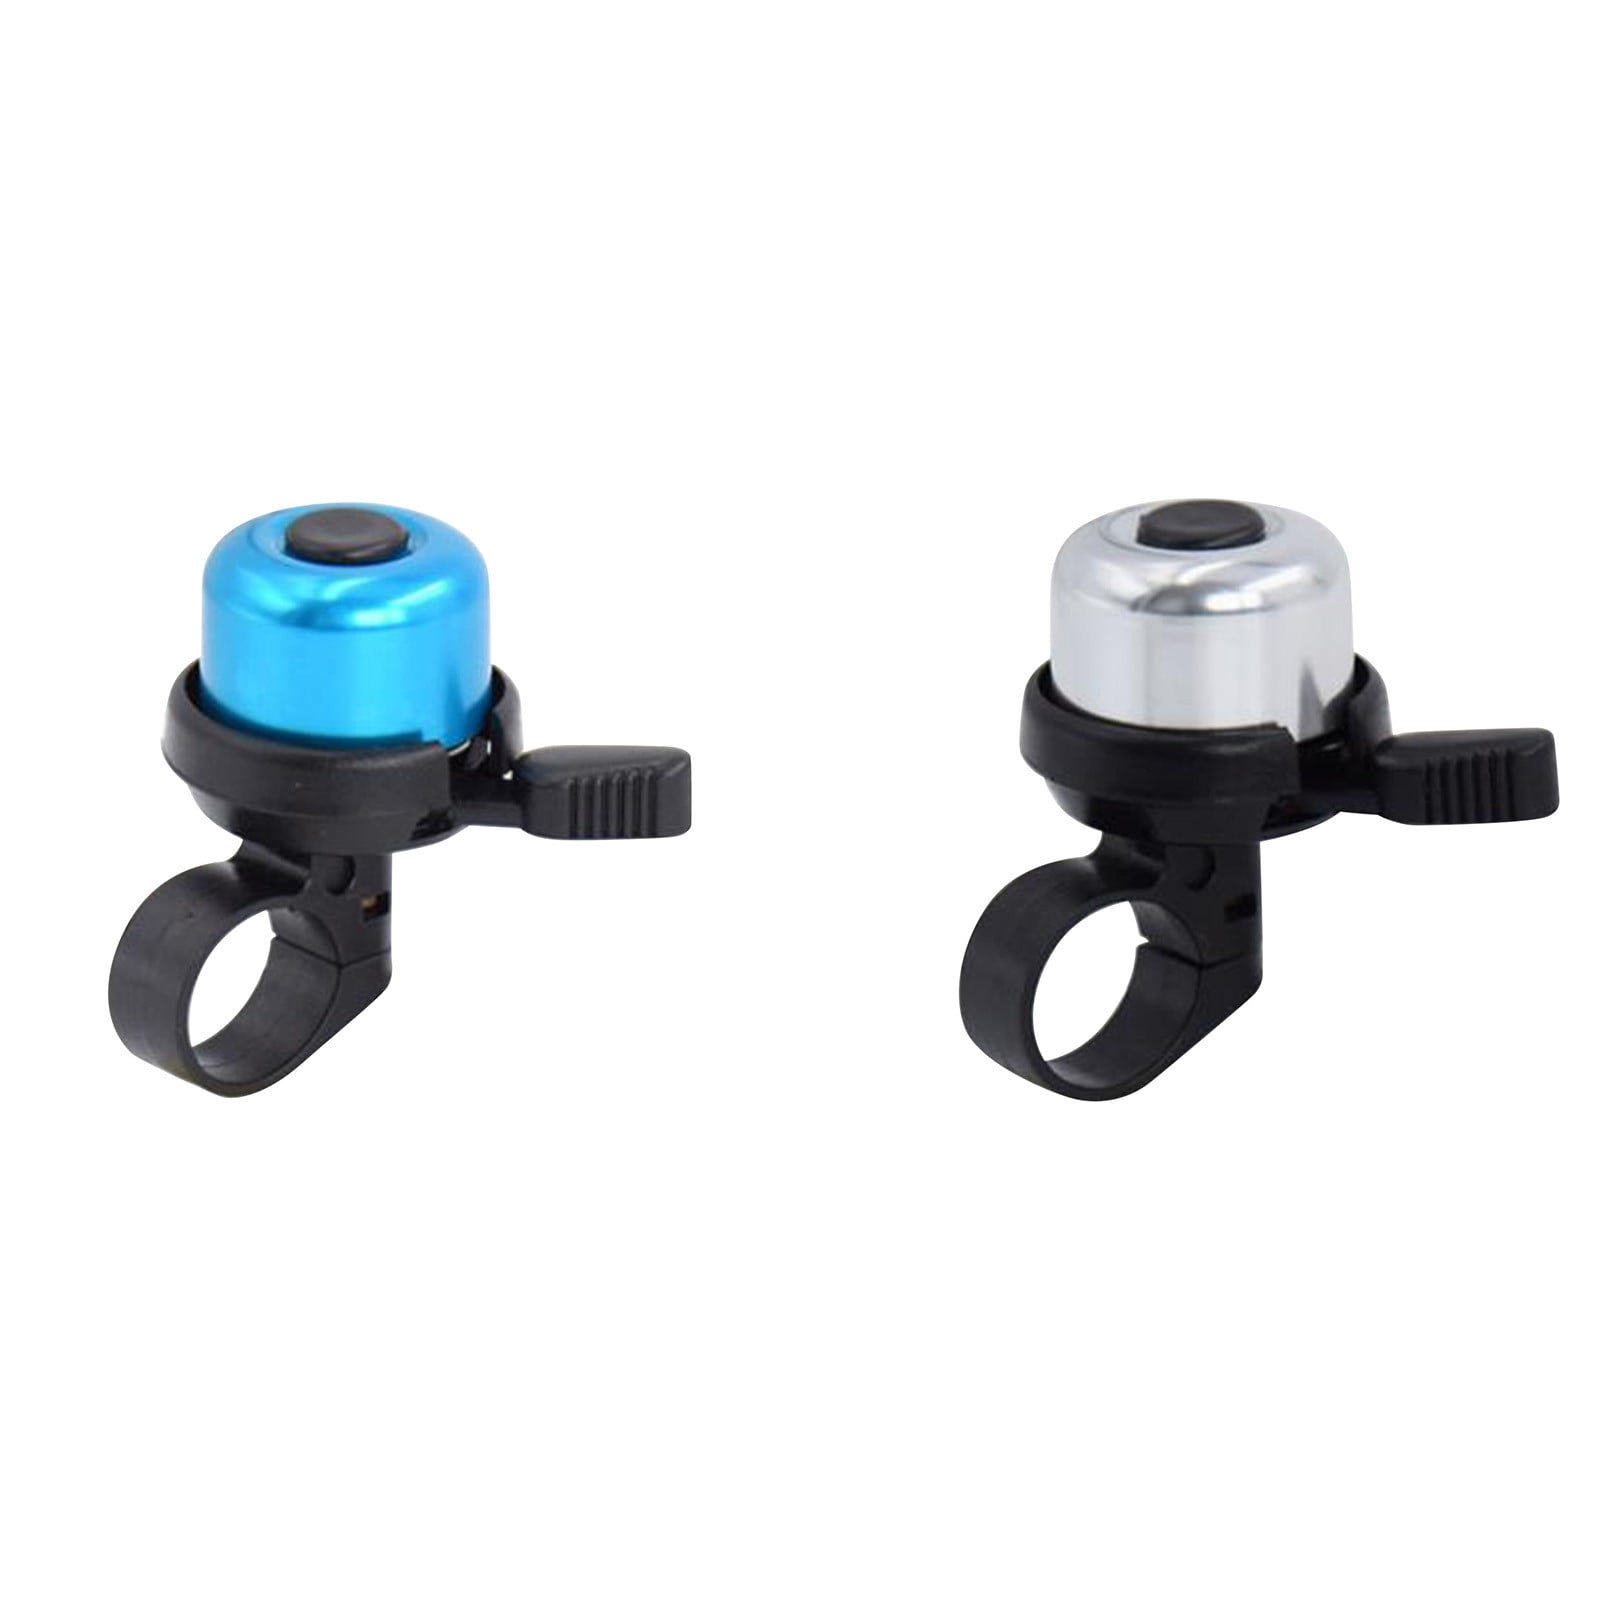 Details about   Bike Bell Alloy Mountain Road Bicycle Compass Bell Alarm Bike E6Y4 Sup U3K6 G2L5 